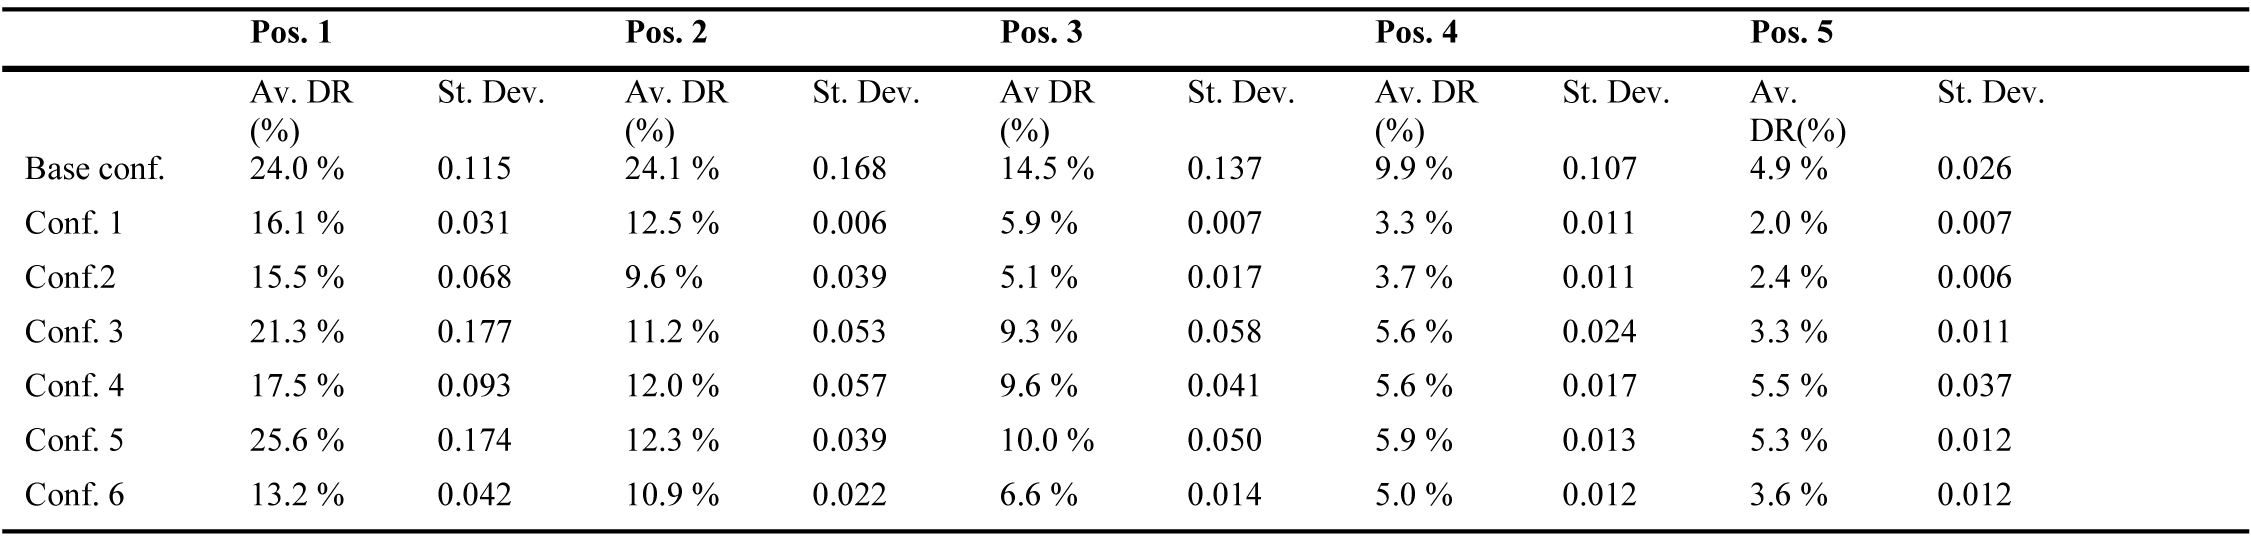 Average DR % and standard deviations for all the tests.